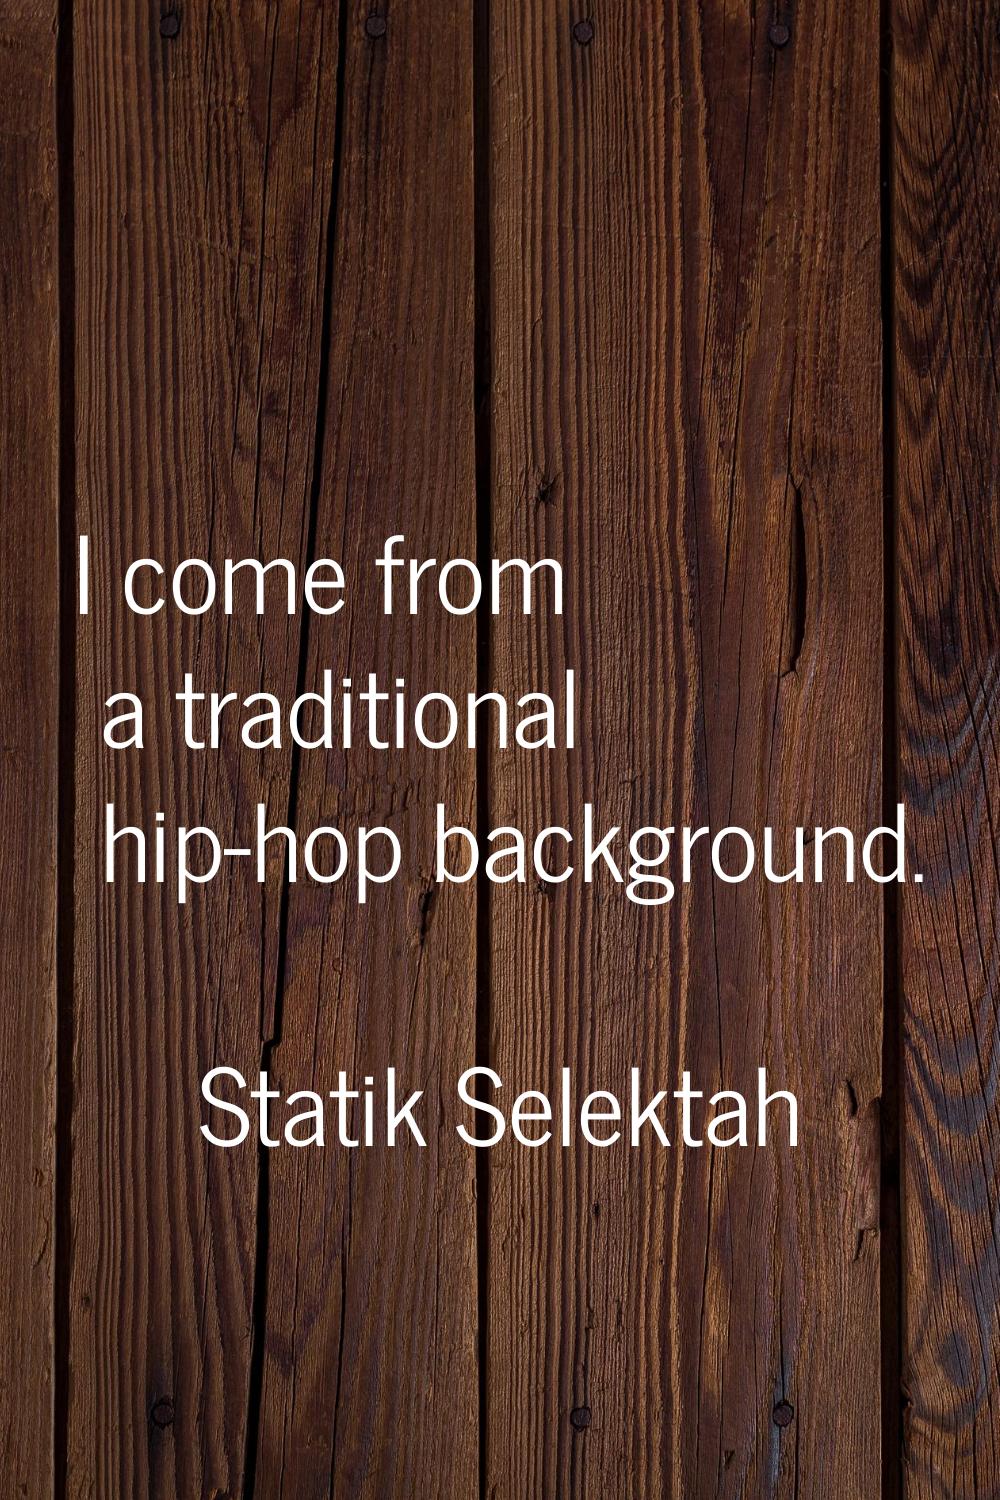 I come from a traditional hip-hop background.